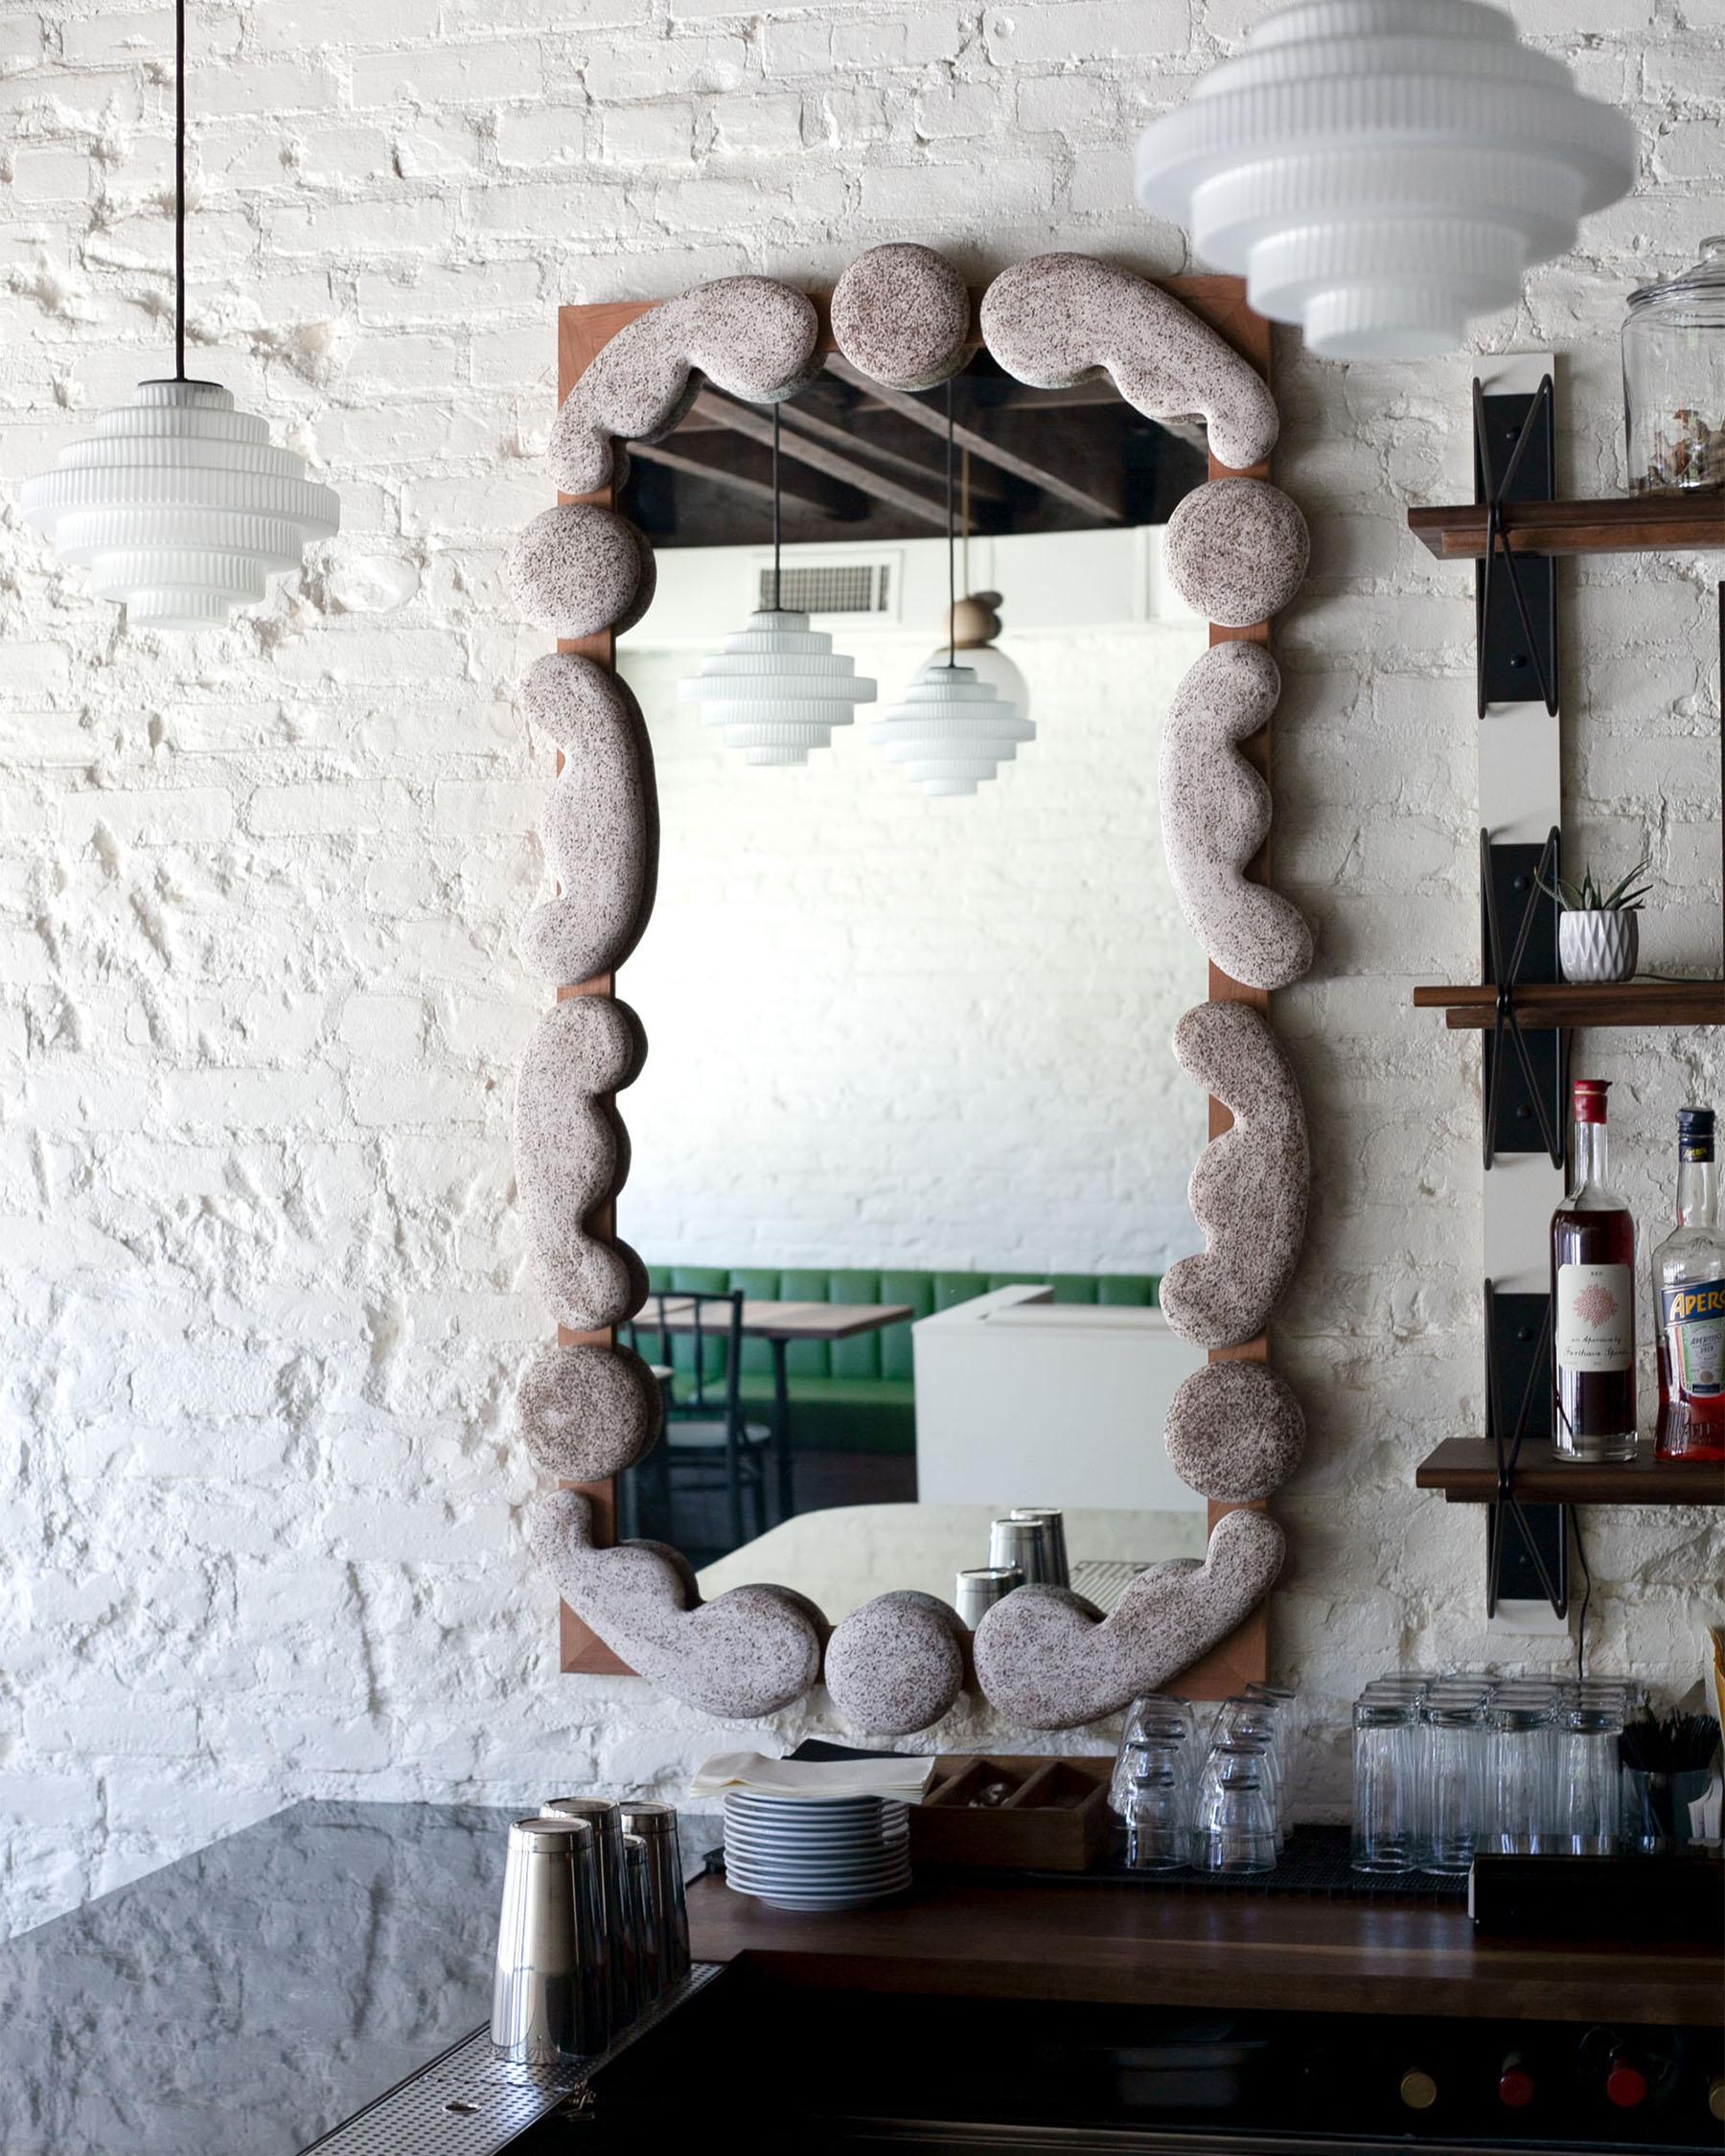 1 unit in-stock. Ships in approx. 2 weeks or sooner.

The Roebling wall mirror was originally conceived during Luft Tanaka Studio's work on the interior design of Chino Grande, a restaurant in Williamsburg, Brooklyn. 

The Roebling Wall Mirror